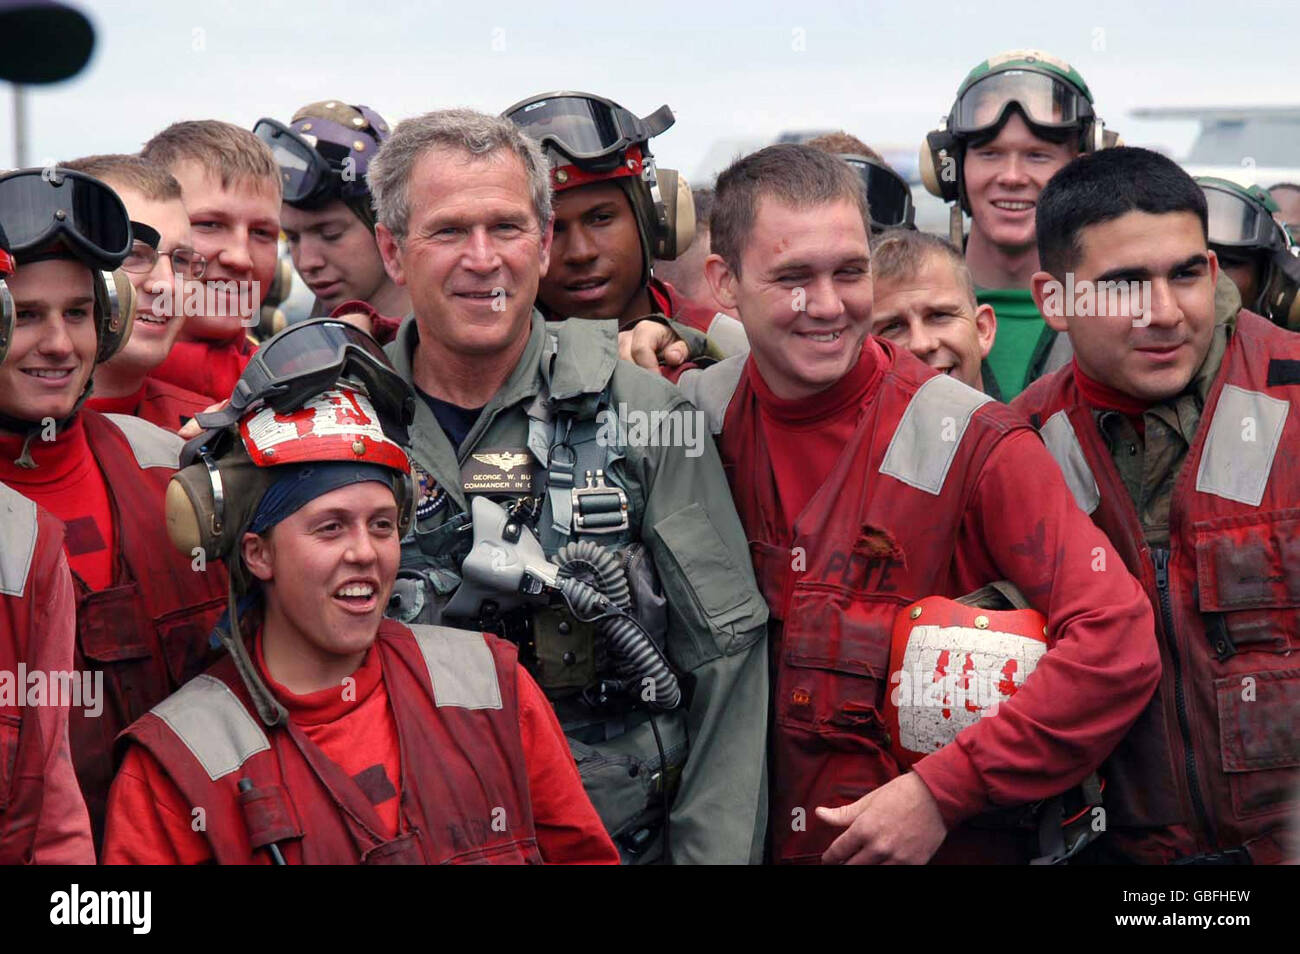 U.S. President George W. Bush poses for a photo with sailors on the flight deck after landing in a S-3B Viking aircraft on the aircraft carrier USS Abraham Lincoln during a visit May 1, 2003 in the Pacific Ocean. The Lincoln in returning from a 10-month deployment to the Arabian Gulf in support of Operation Iraqi Freedom. Stock Photo